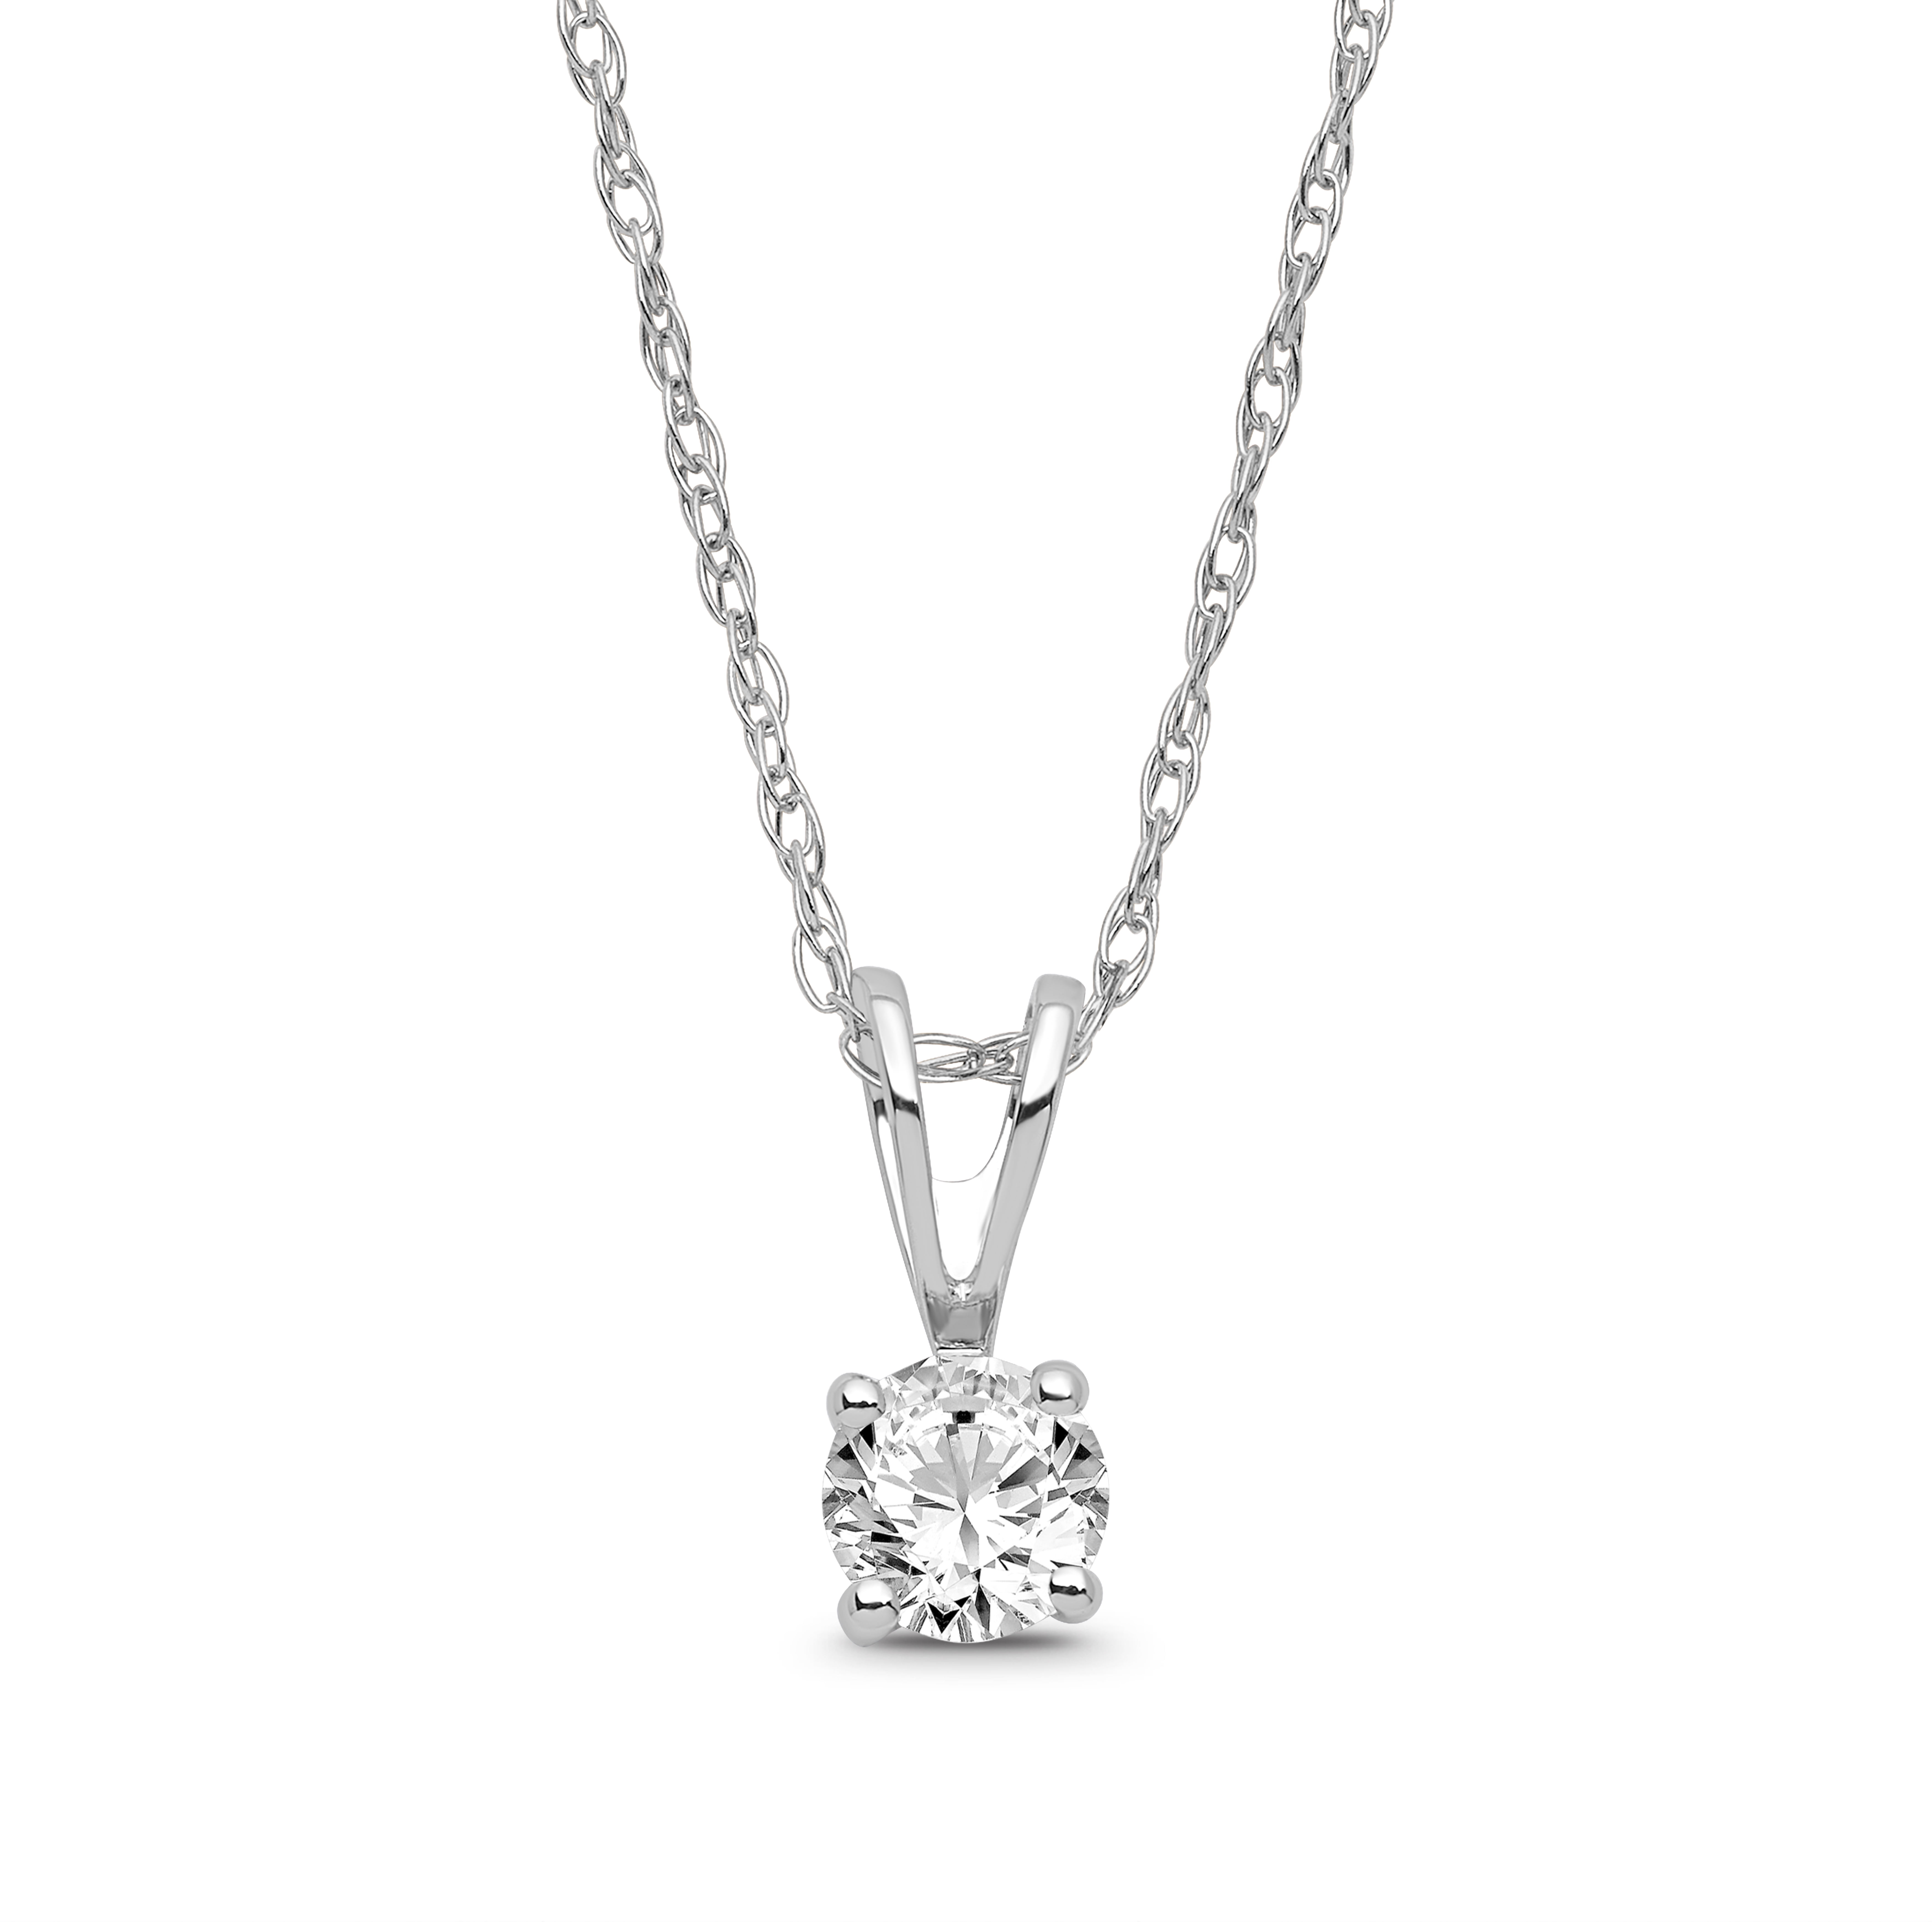 14k White Gold Sterling Silver Round Diamond Solitaire Pendant Chain Necklace 